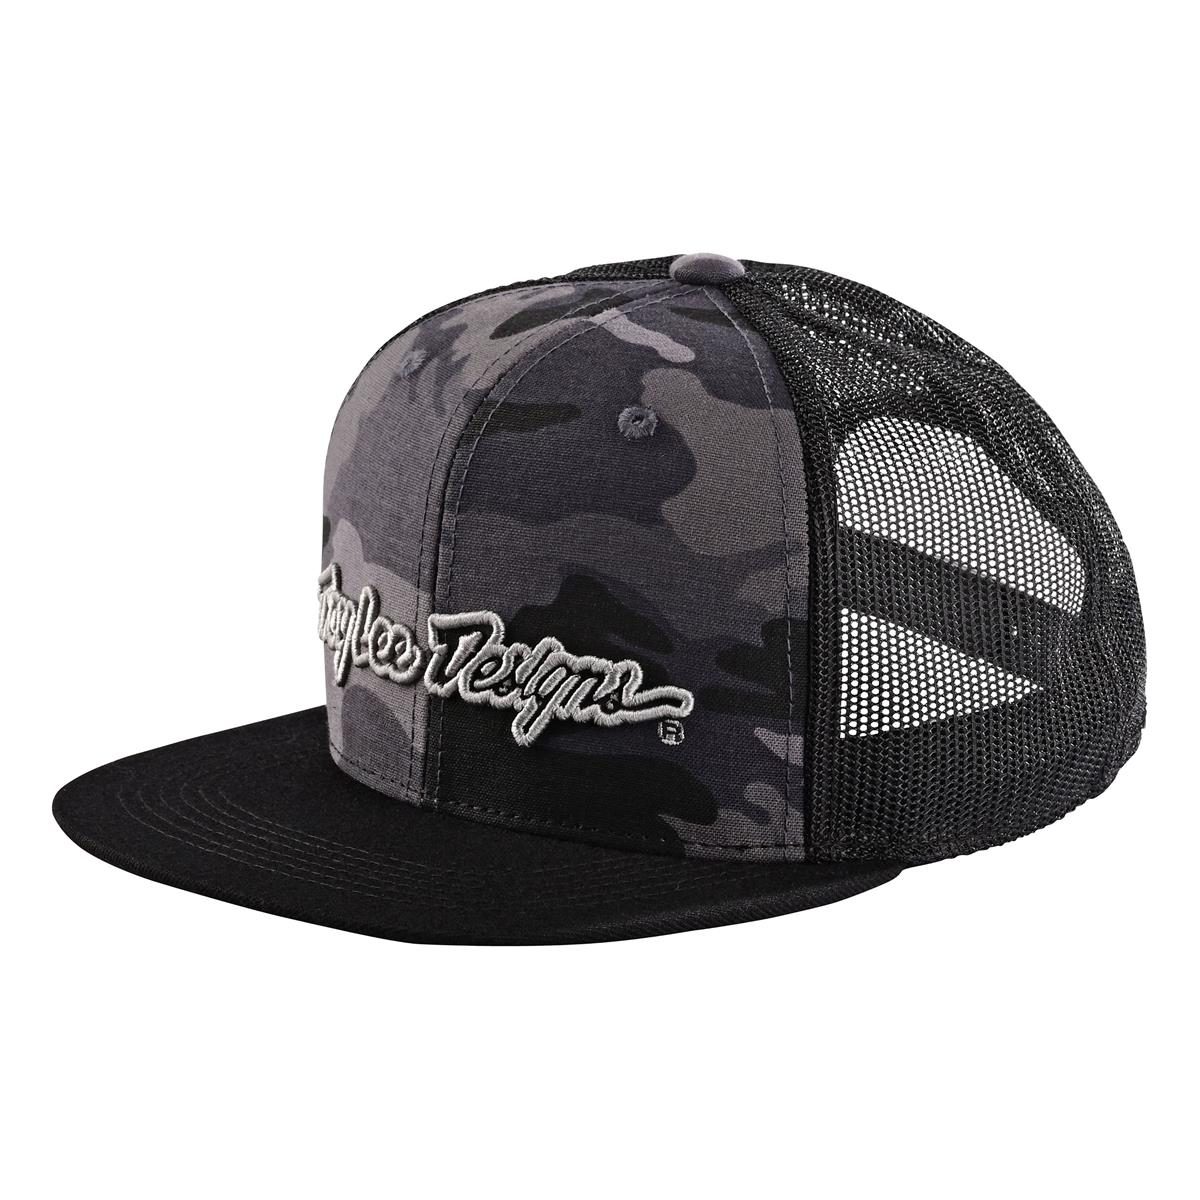 Troy Lee Designs 9Fifty Cappellino Snap Back Signature Camo Black/Silver